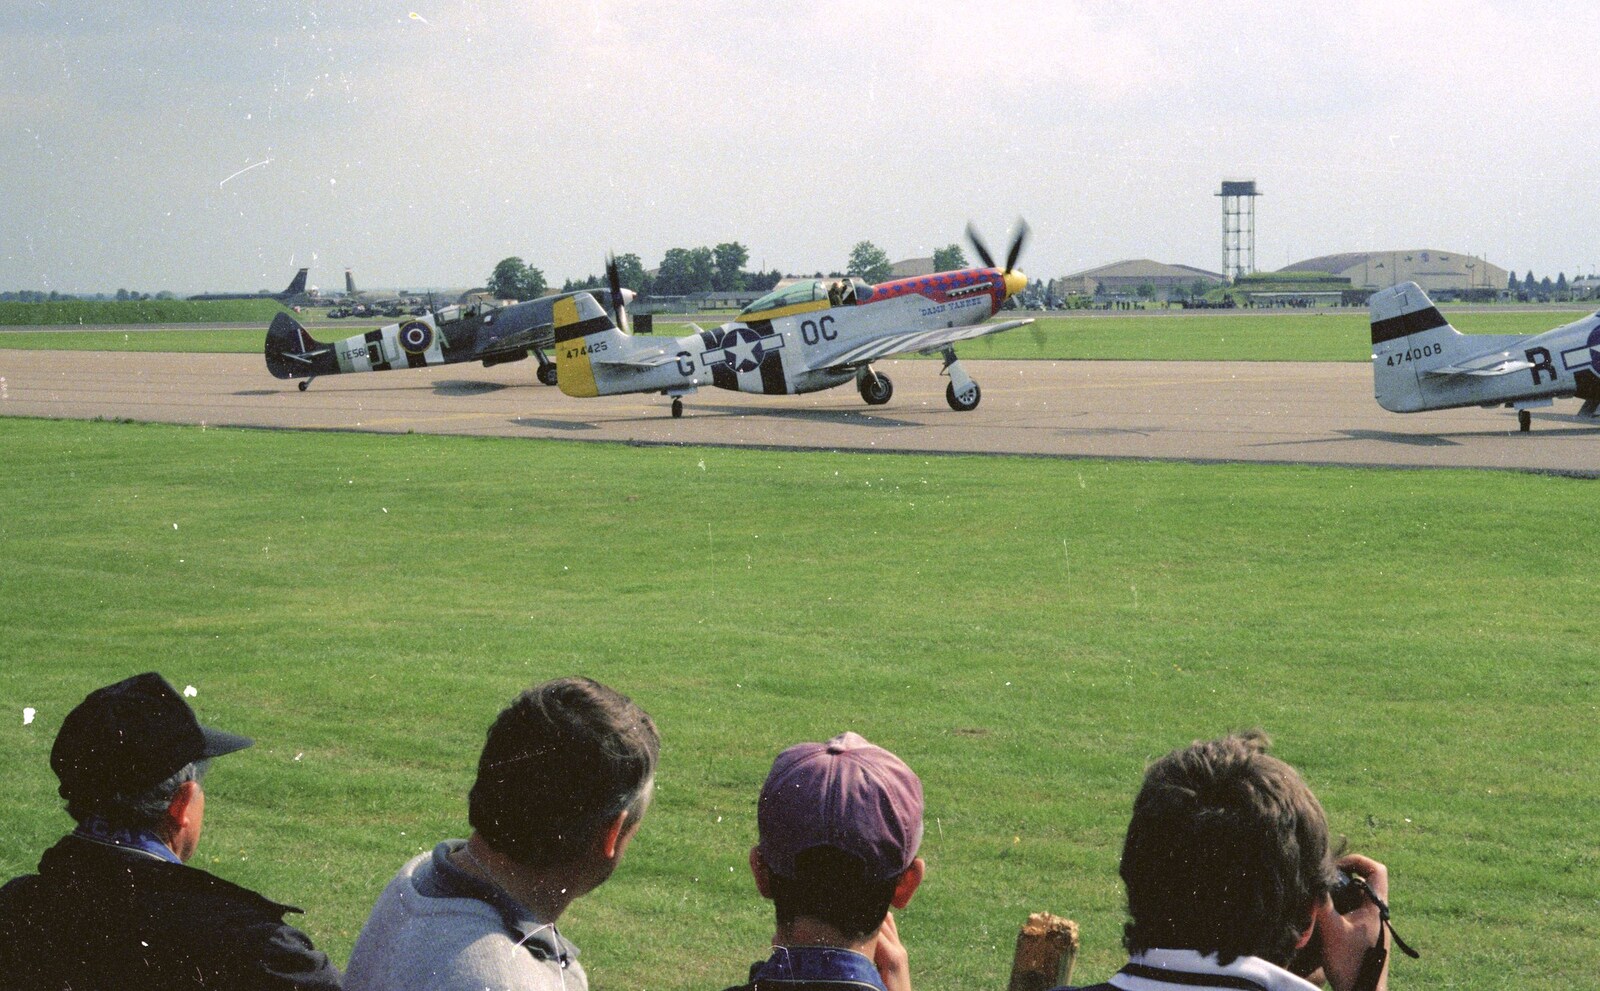 A Spitfire and P51 Mustang from The Mildenhall Air Fete, Mildenhall, Suffolk - 29th May 1994